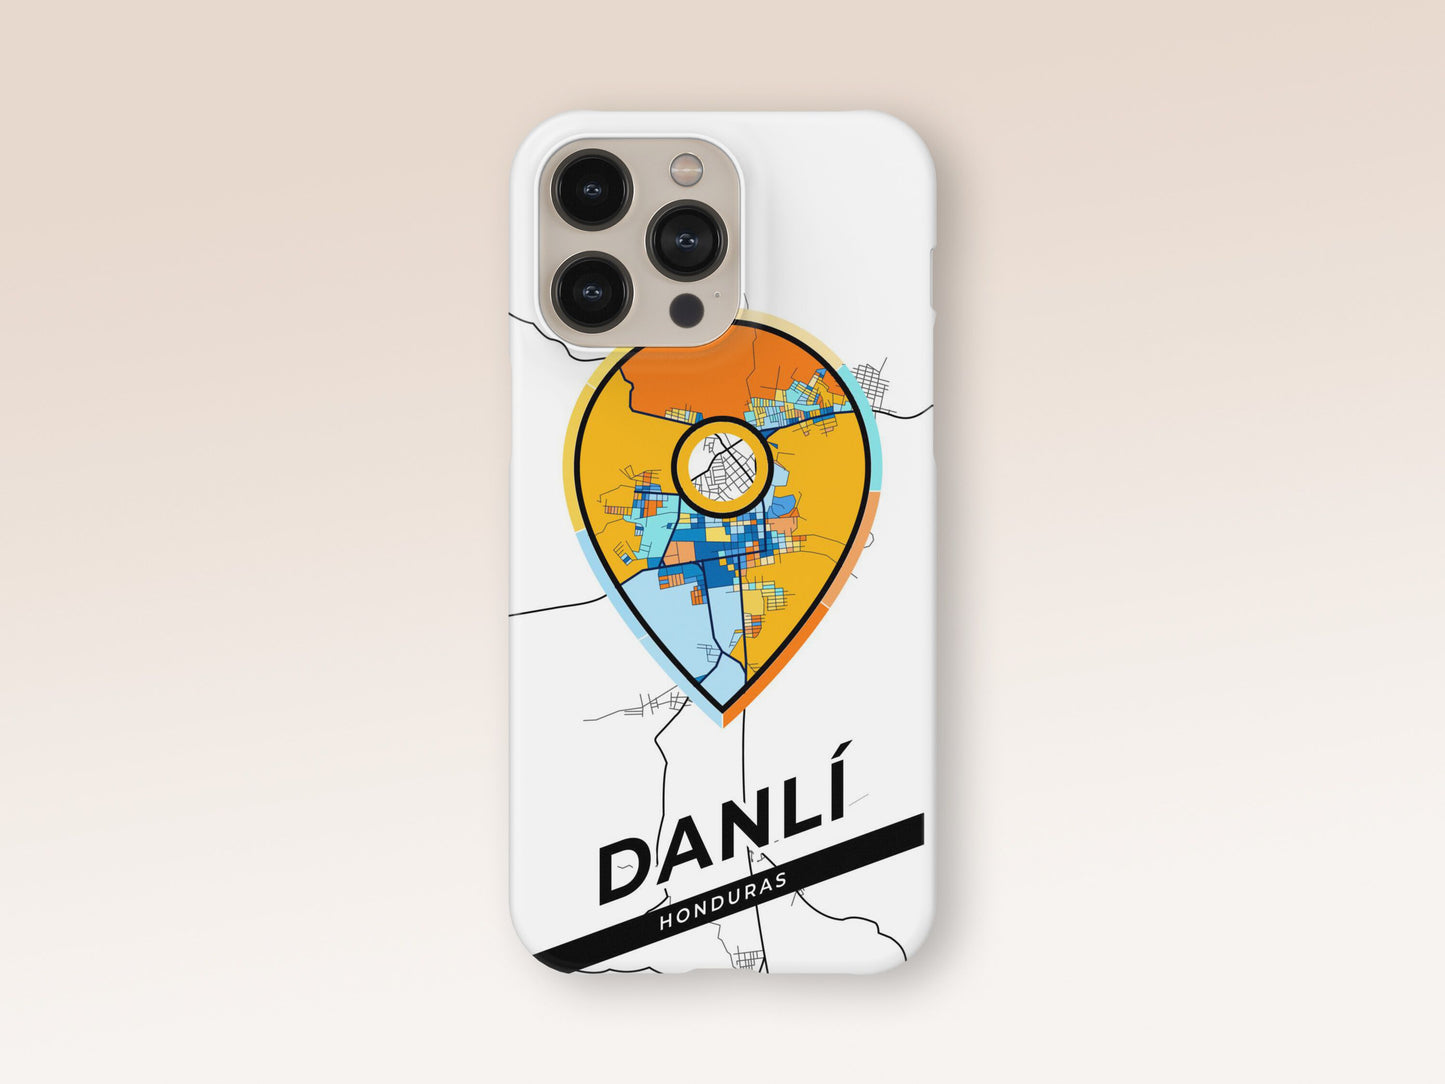 Danlí Honduras slim phone case with colorful icon. Birthday, wedding or housewarming gift. Couple match cases. 1